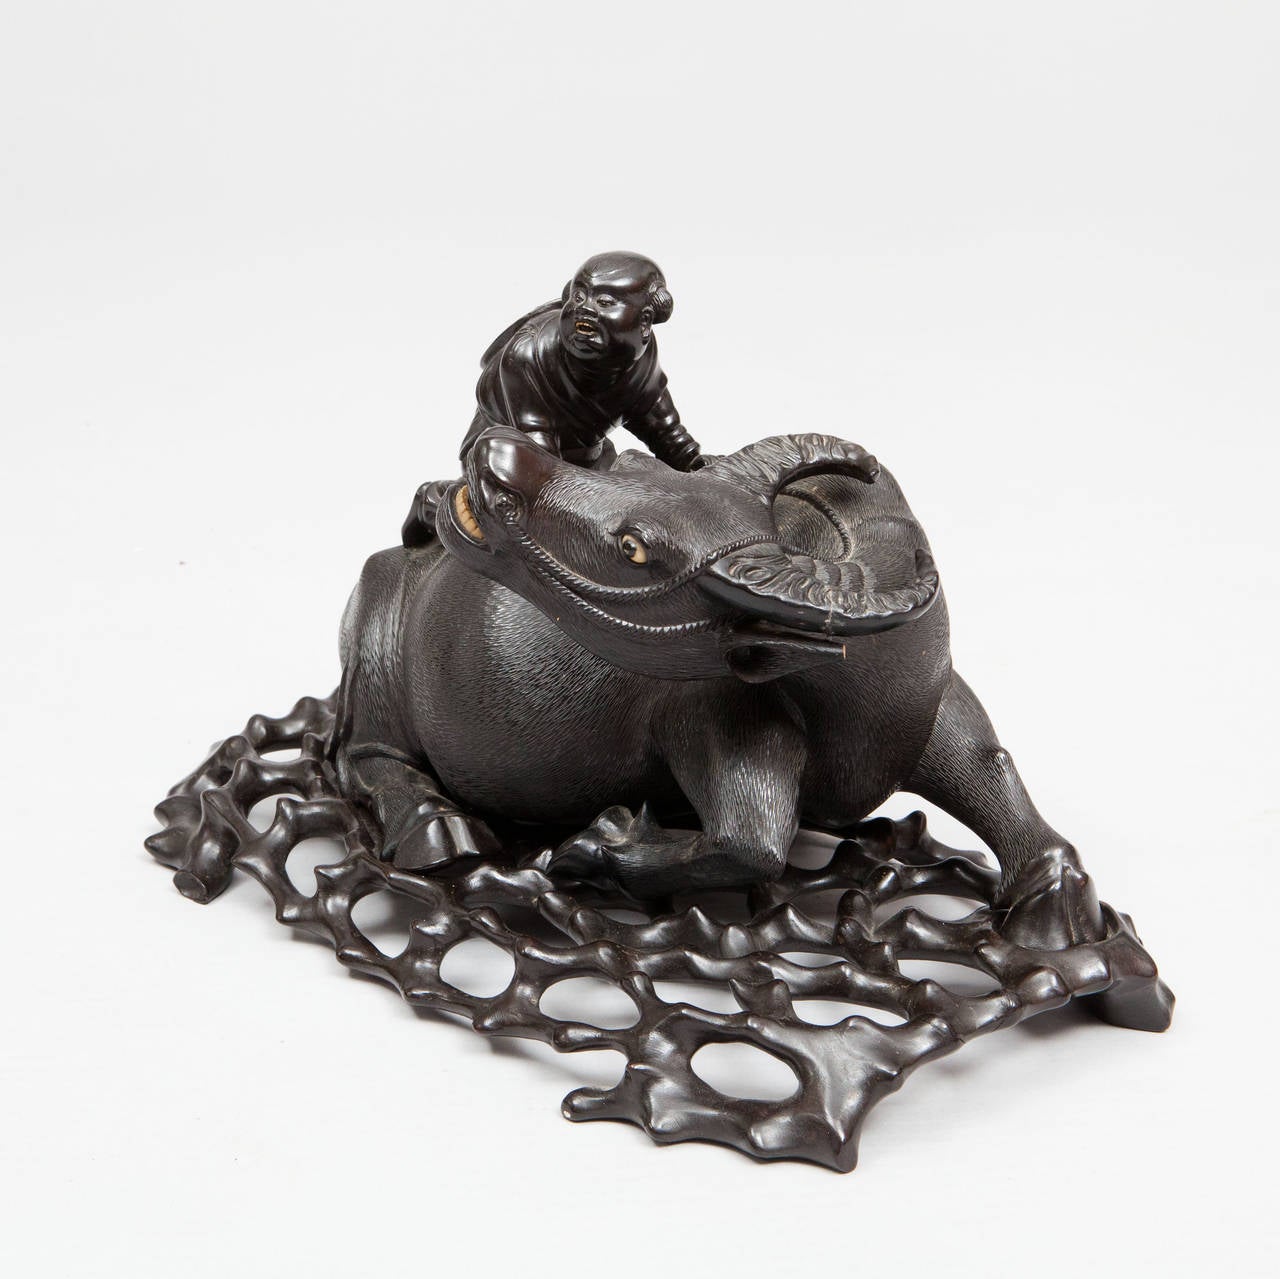 ​A very fine example of a Chinese 19th century carved recumbent water buffalo with a boy seated on his back. The well-carved Chinese hardwood is of an even dark tone with very fine carving, raised on its original hardwood pierced base representing